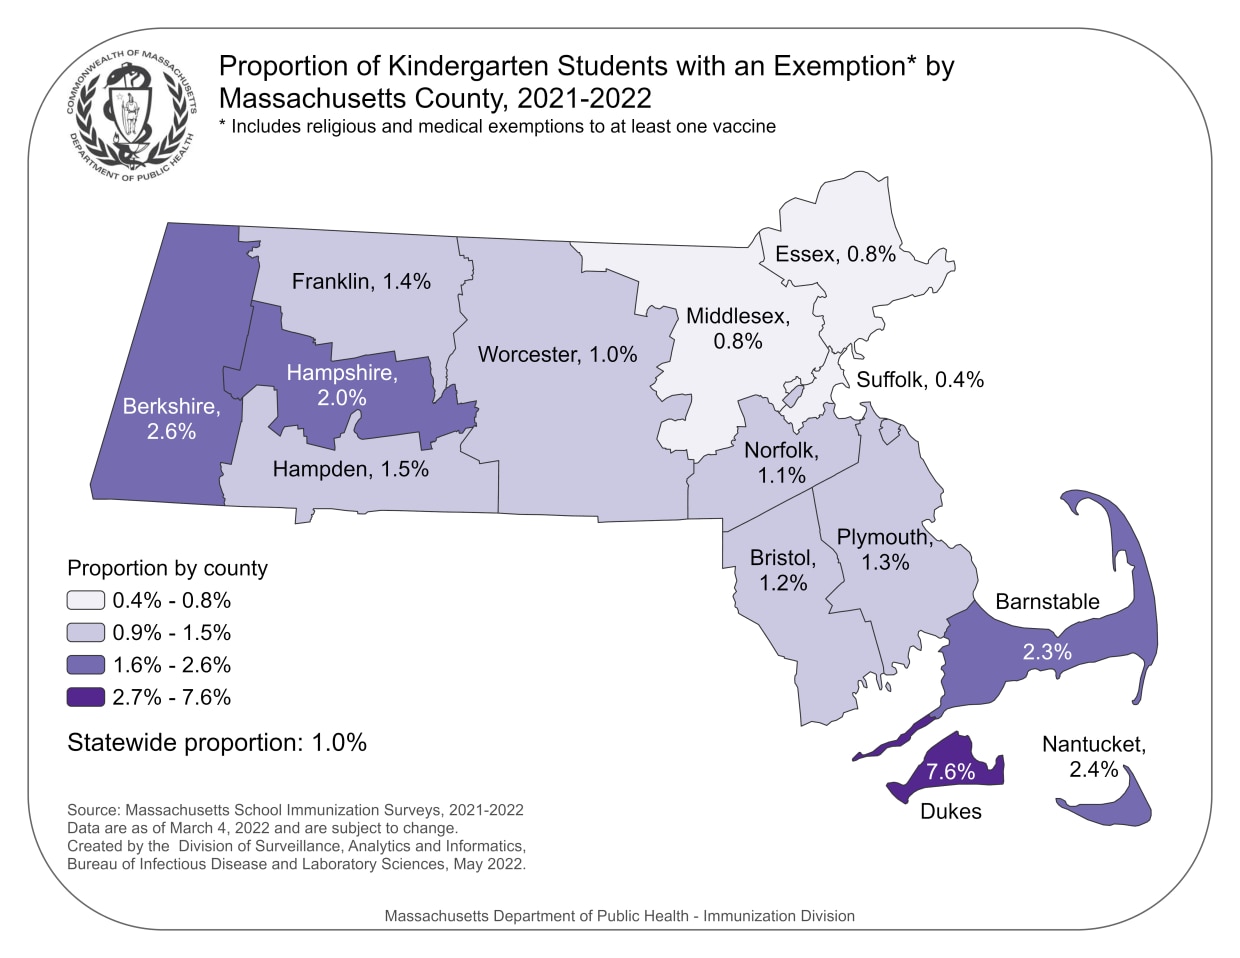 Map shows Rates of Kindergarten Students by Mass County with an Exemption, 2021-2022. These are religious and medical exemptions combined. These data are current as of March 4, 2022 and are subject to change. The source of these data is via the Massachusetts School Immunization Surveys 2021-2022. State average 2.3% Barnstable 2.6% Berkshire 1.2% Bristol 7.6% Dukes 1.5% Hampden 2.0% Hampshire 0.8% Essex 1.4% Franklin 0.8% Middlesex 2.4% Nantucket 1.1% Norfolk 1.3% Plymouth: 0.4% Suffolk 1.0% Worcester